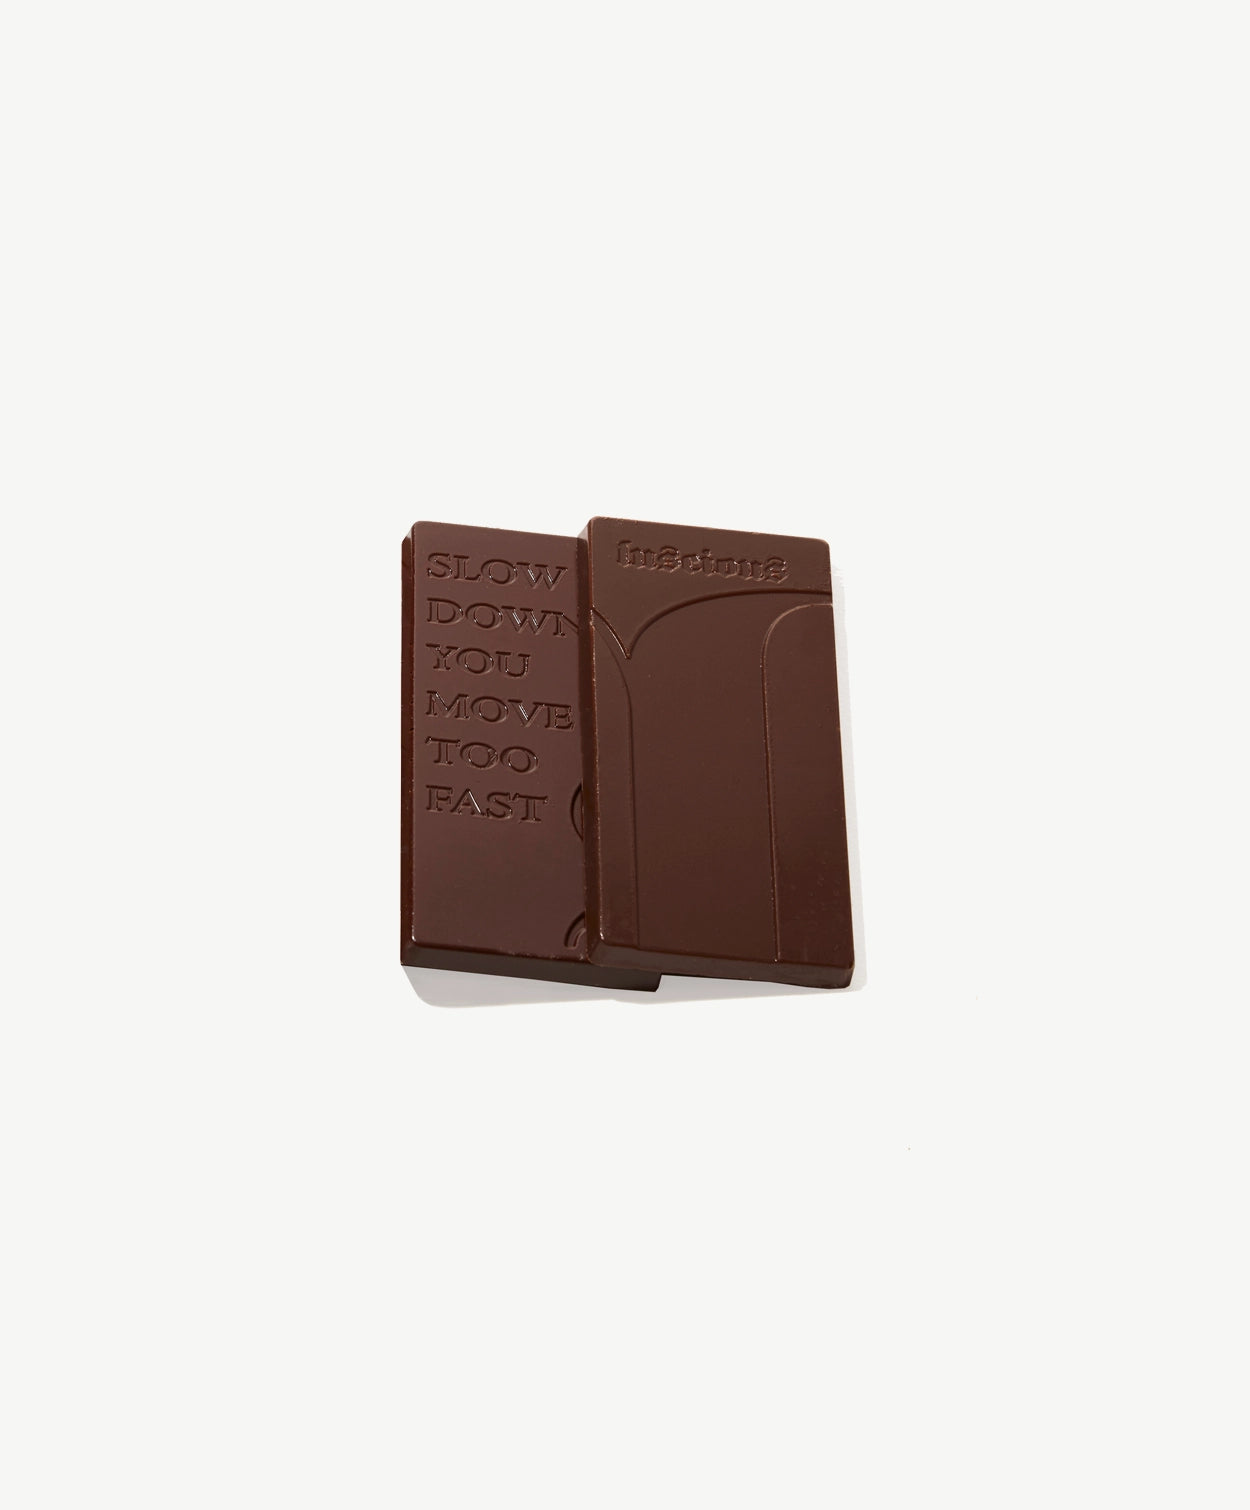 Two Vosges Taste Test mini bars sit beside one another on a light grey background.